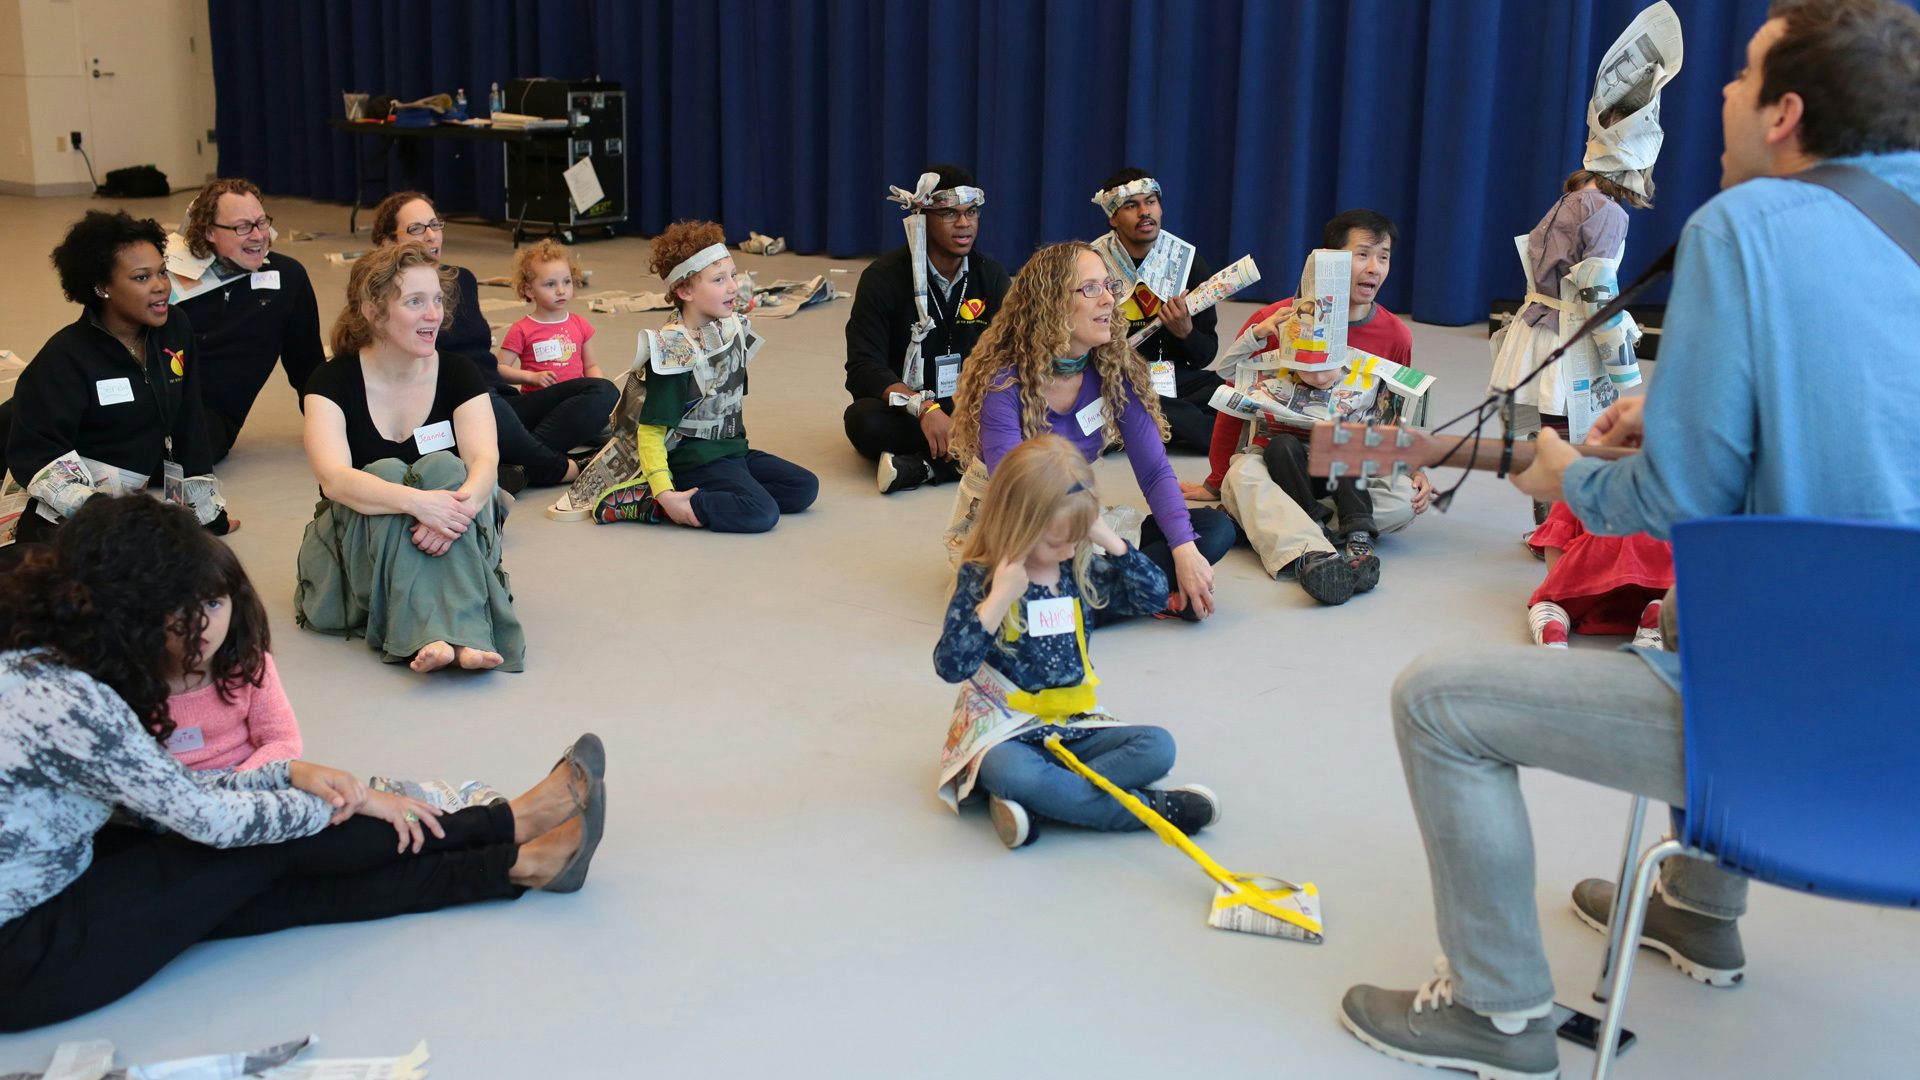 A group of adults and kids, some wearing costumes made out of newspaper, sit around each other as a man sitting in front of the group plays the guitar.